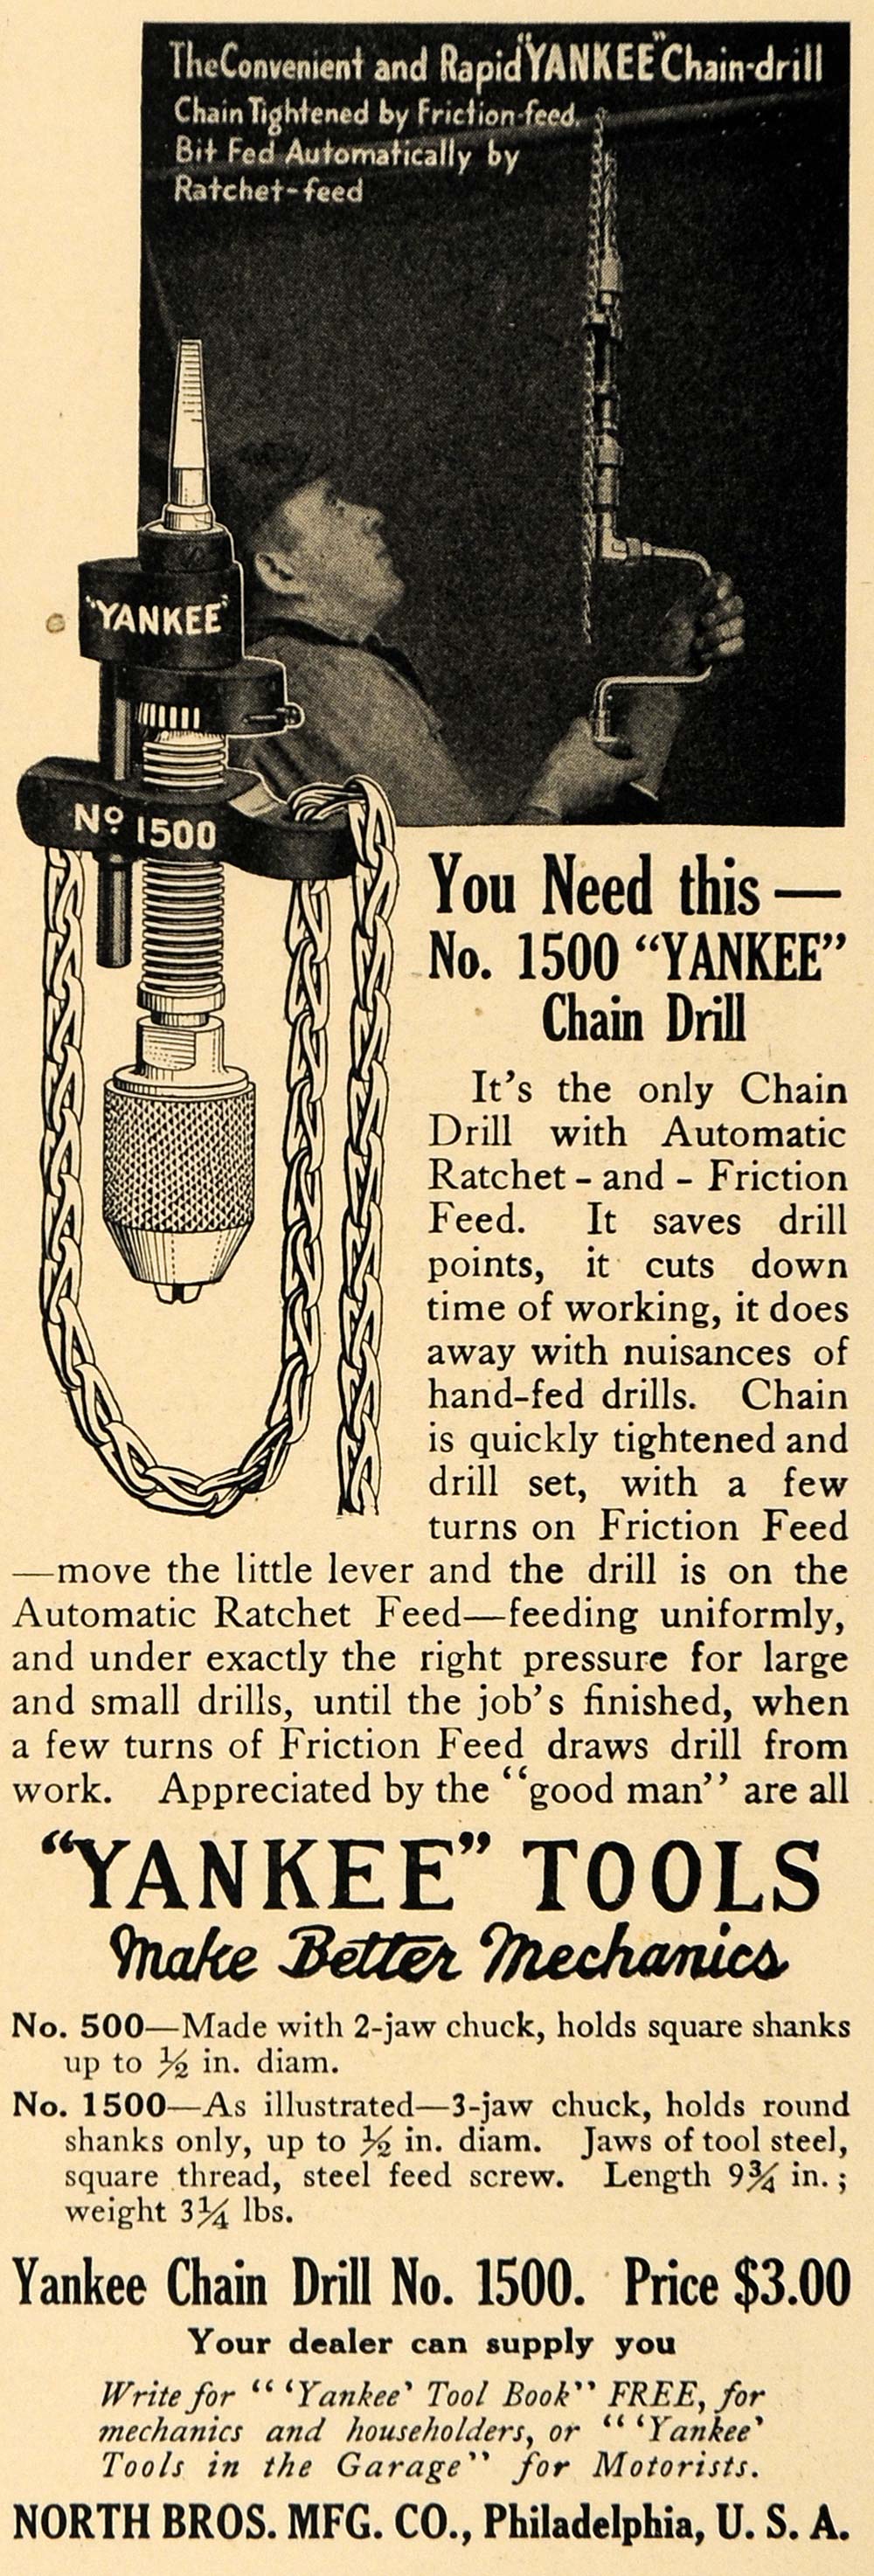 1915 Ad North Bros. Chain Drill Ratchet Friction Feed - ORIGINAL ADVERTISING TW1